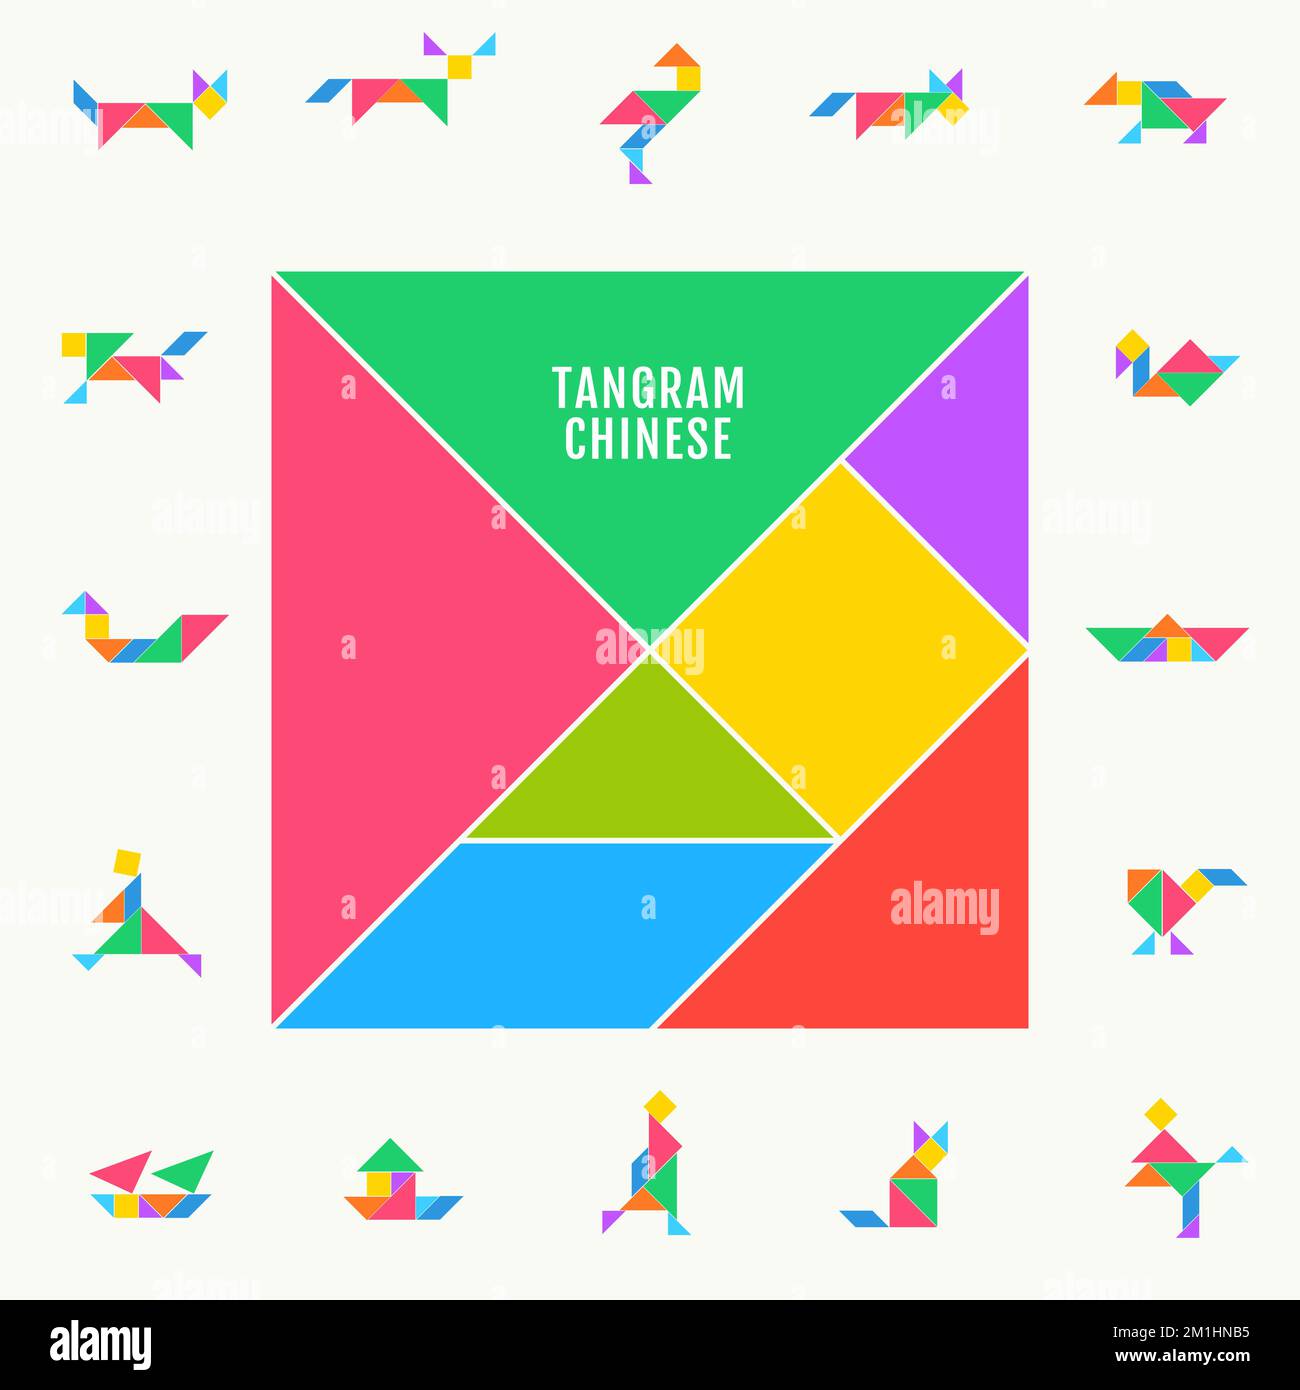 Tangram puzzle square set. Vector triangle geometric tangram template illustration chinese traditional Stock Vector